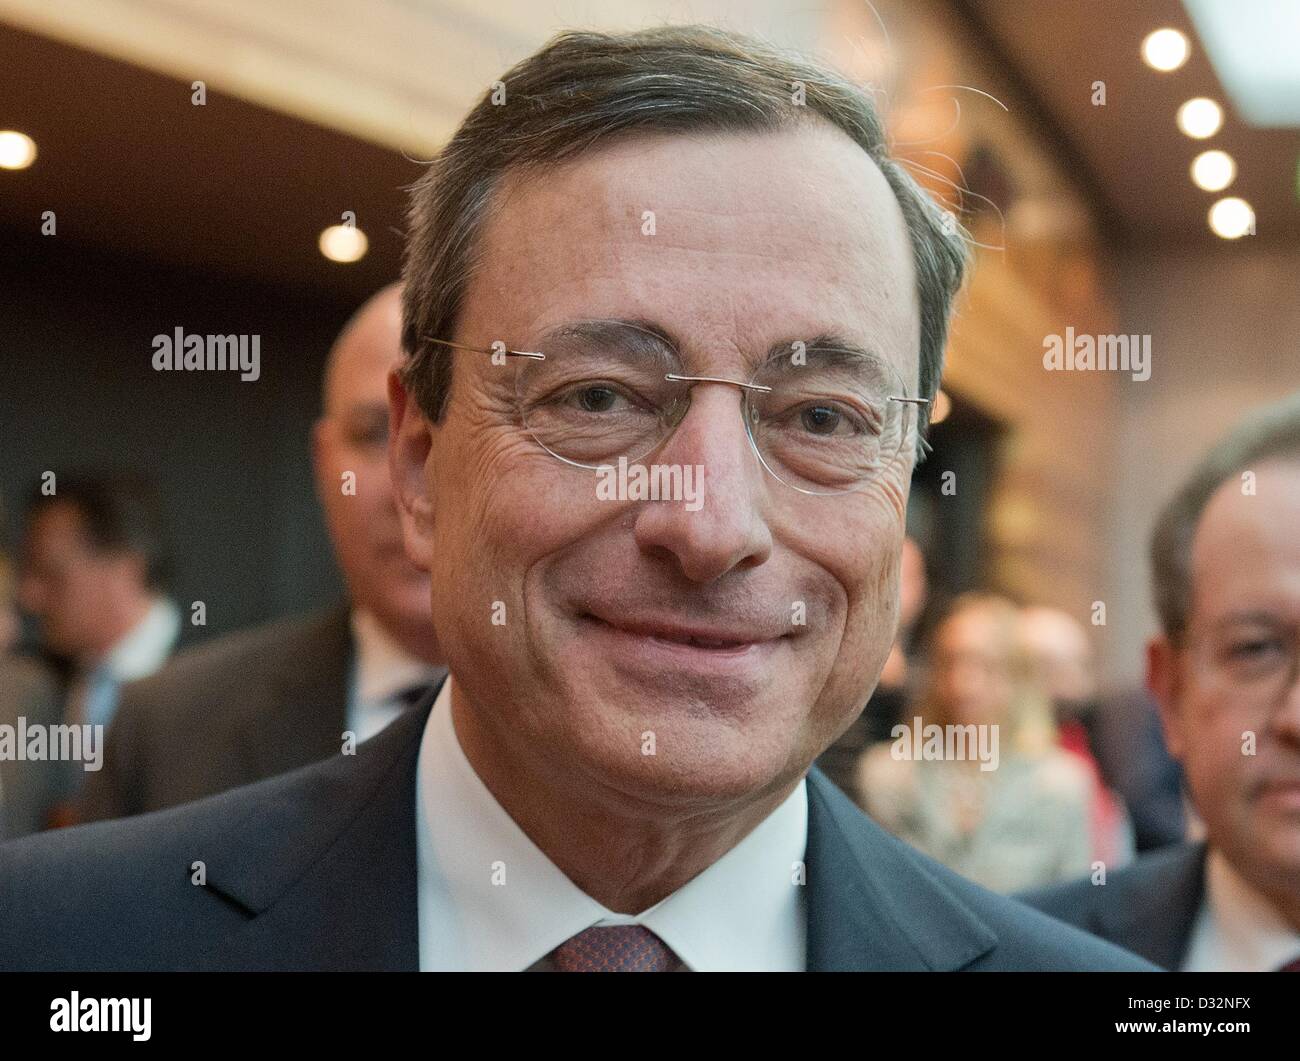 Frankfurt, Germany. 7th February 2013. Frankfurt, Germany. 7th February 2013. President of the European Central Bank (ECB) Mario Draghi arrives at the regular press conference at the ECB after at council meeting in Frankfurt Main, Germany, 07 February 2013. Interest rates remain unchanged at the record low of 0.75 percent. Photo: BORIS ROESSLER/dpa/Alamy Live News/dpa/Alamy Live News Stock Photo